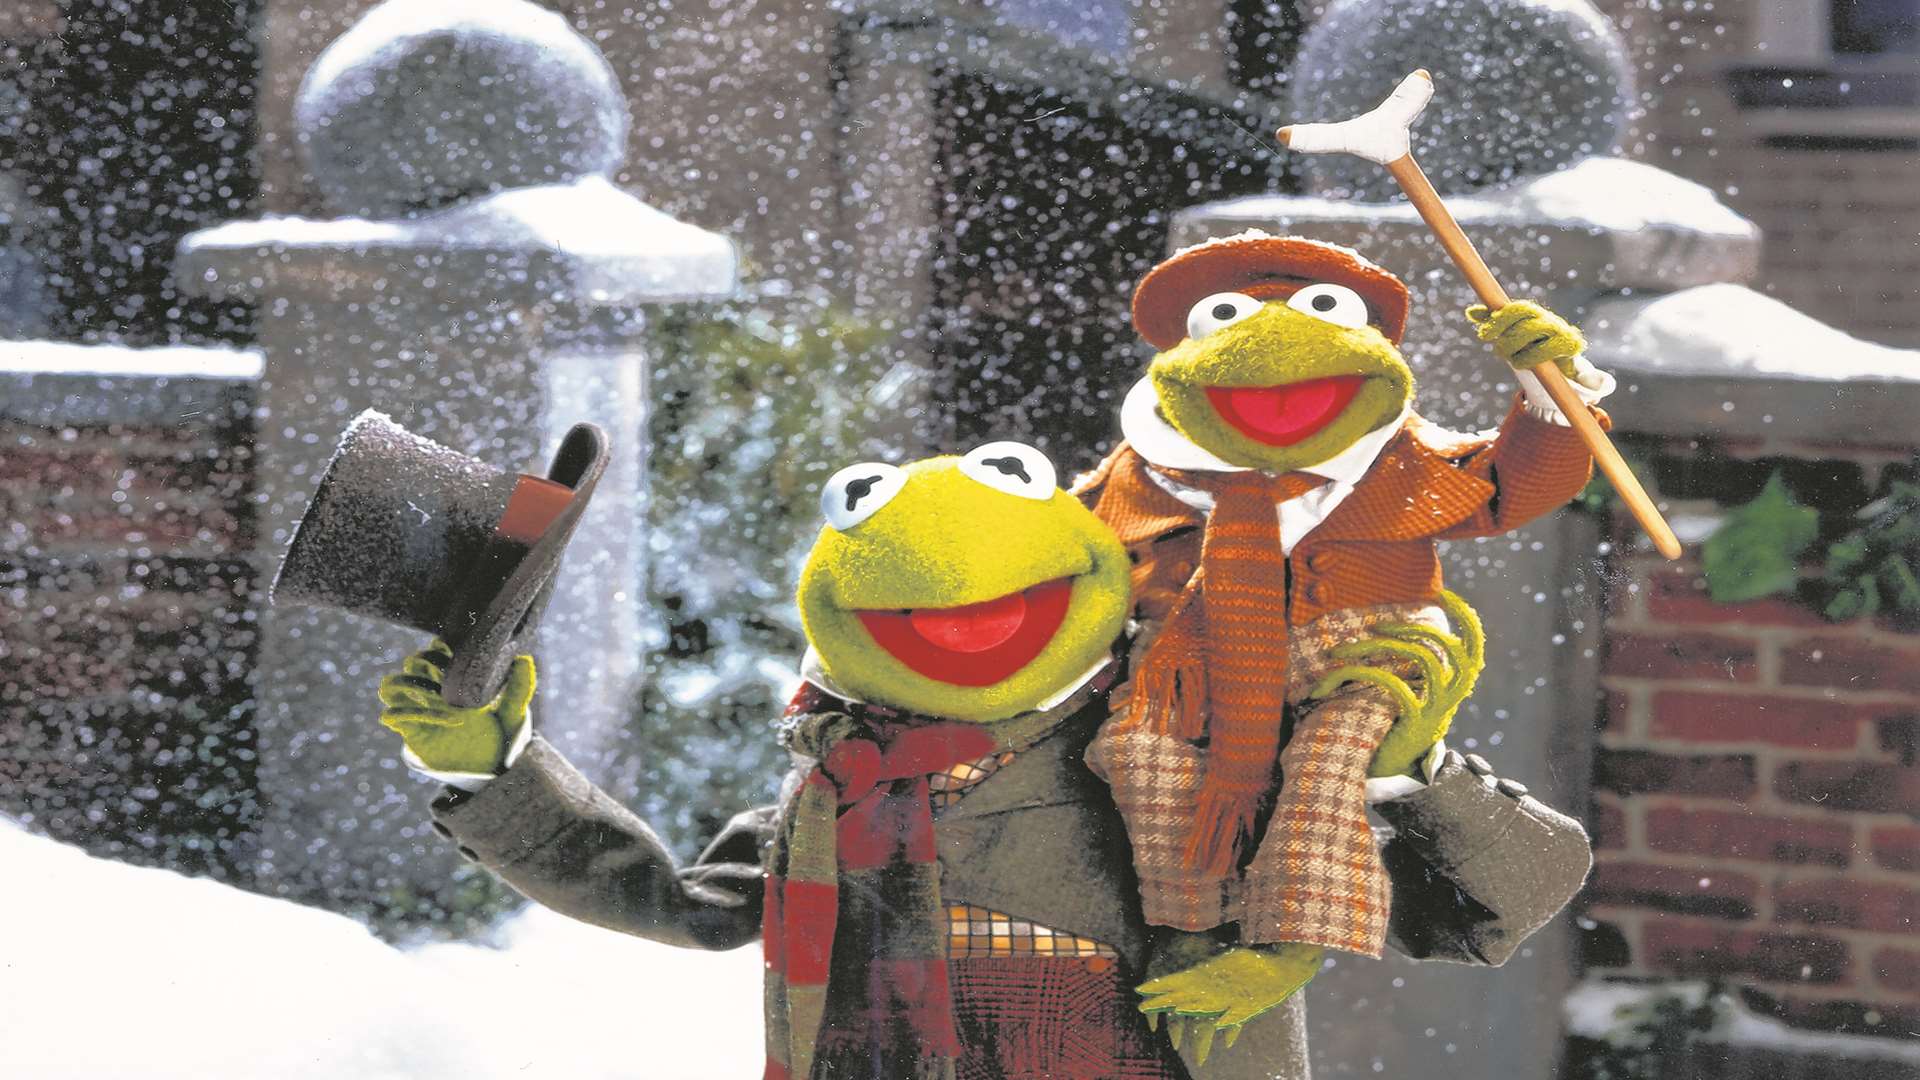 The Muppet Christmas Carol will be screened at the Gulbenkian this Christmas